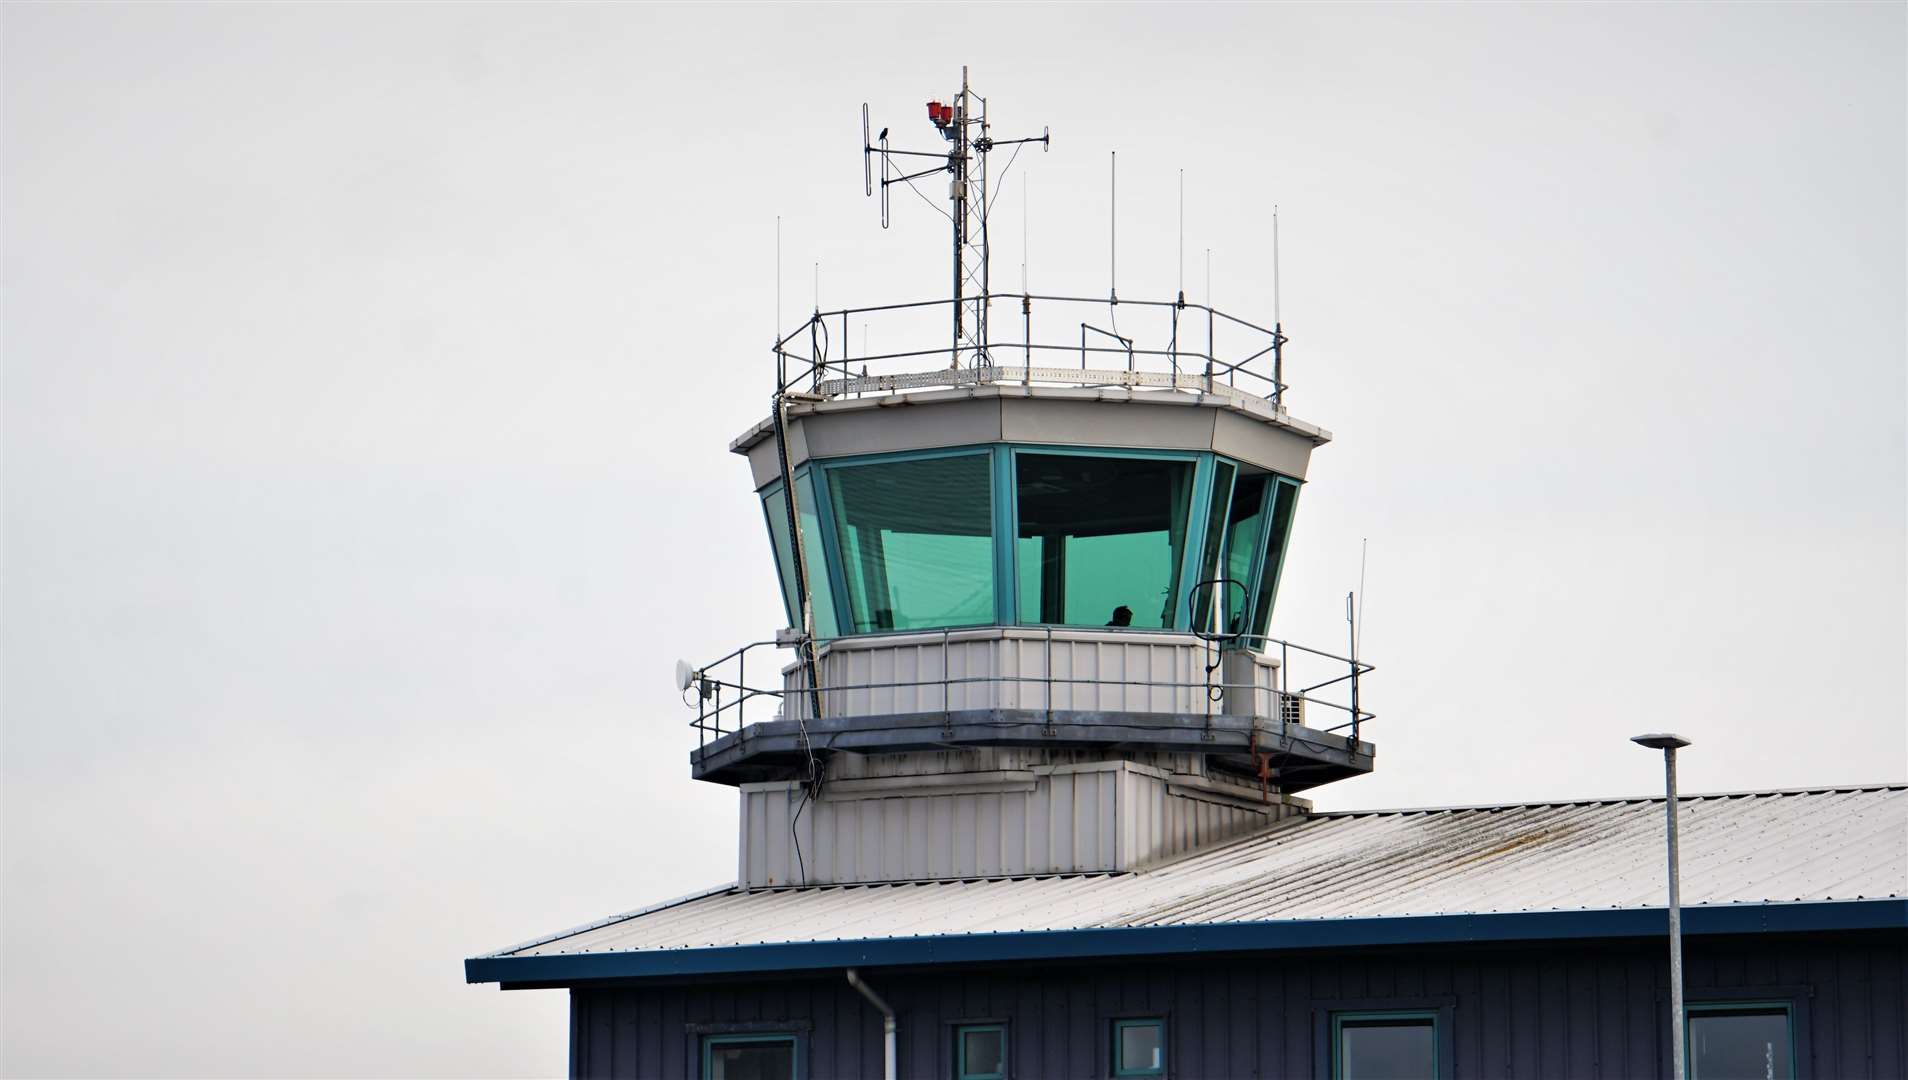 HIAL's plans would see air traffic control removed from Wick Airport and replaced by a flight information service.